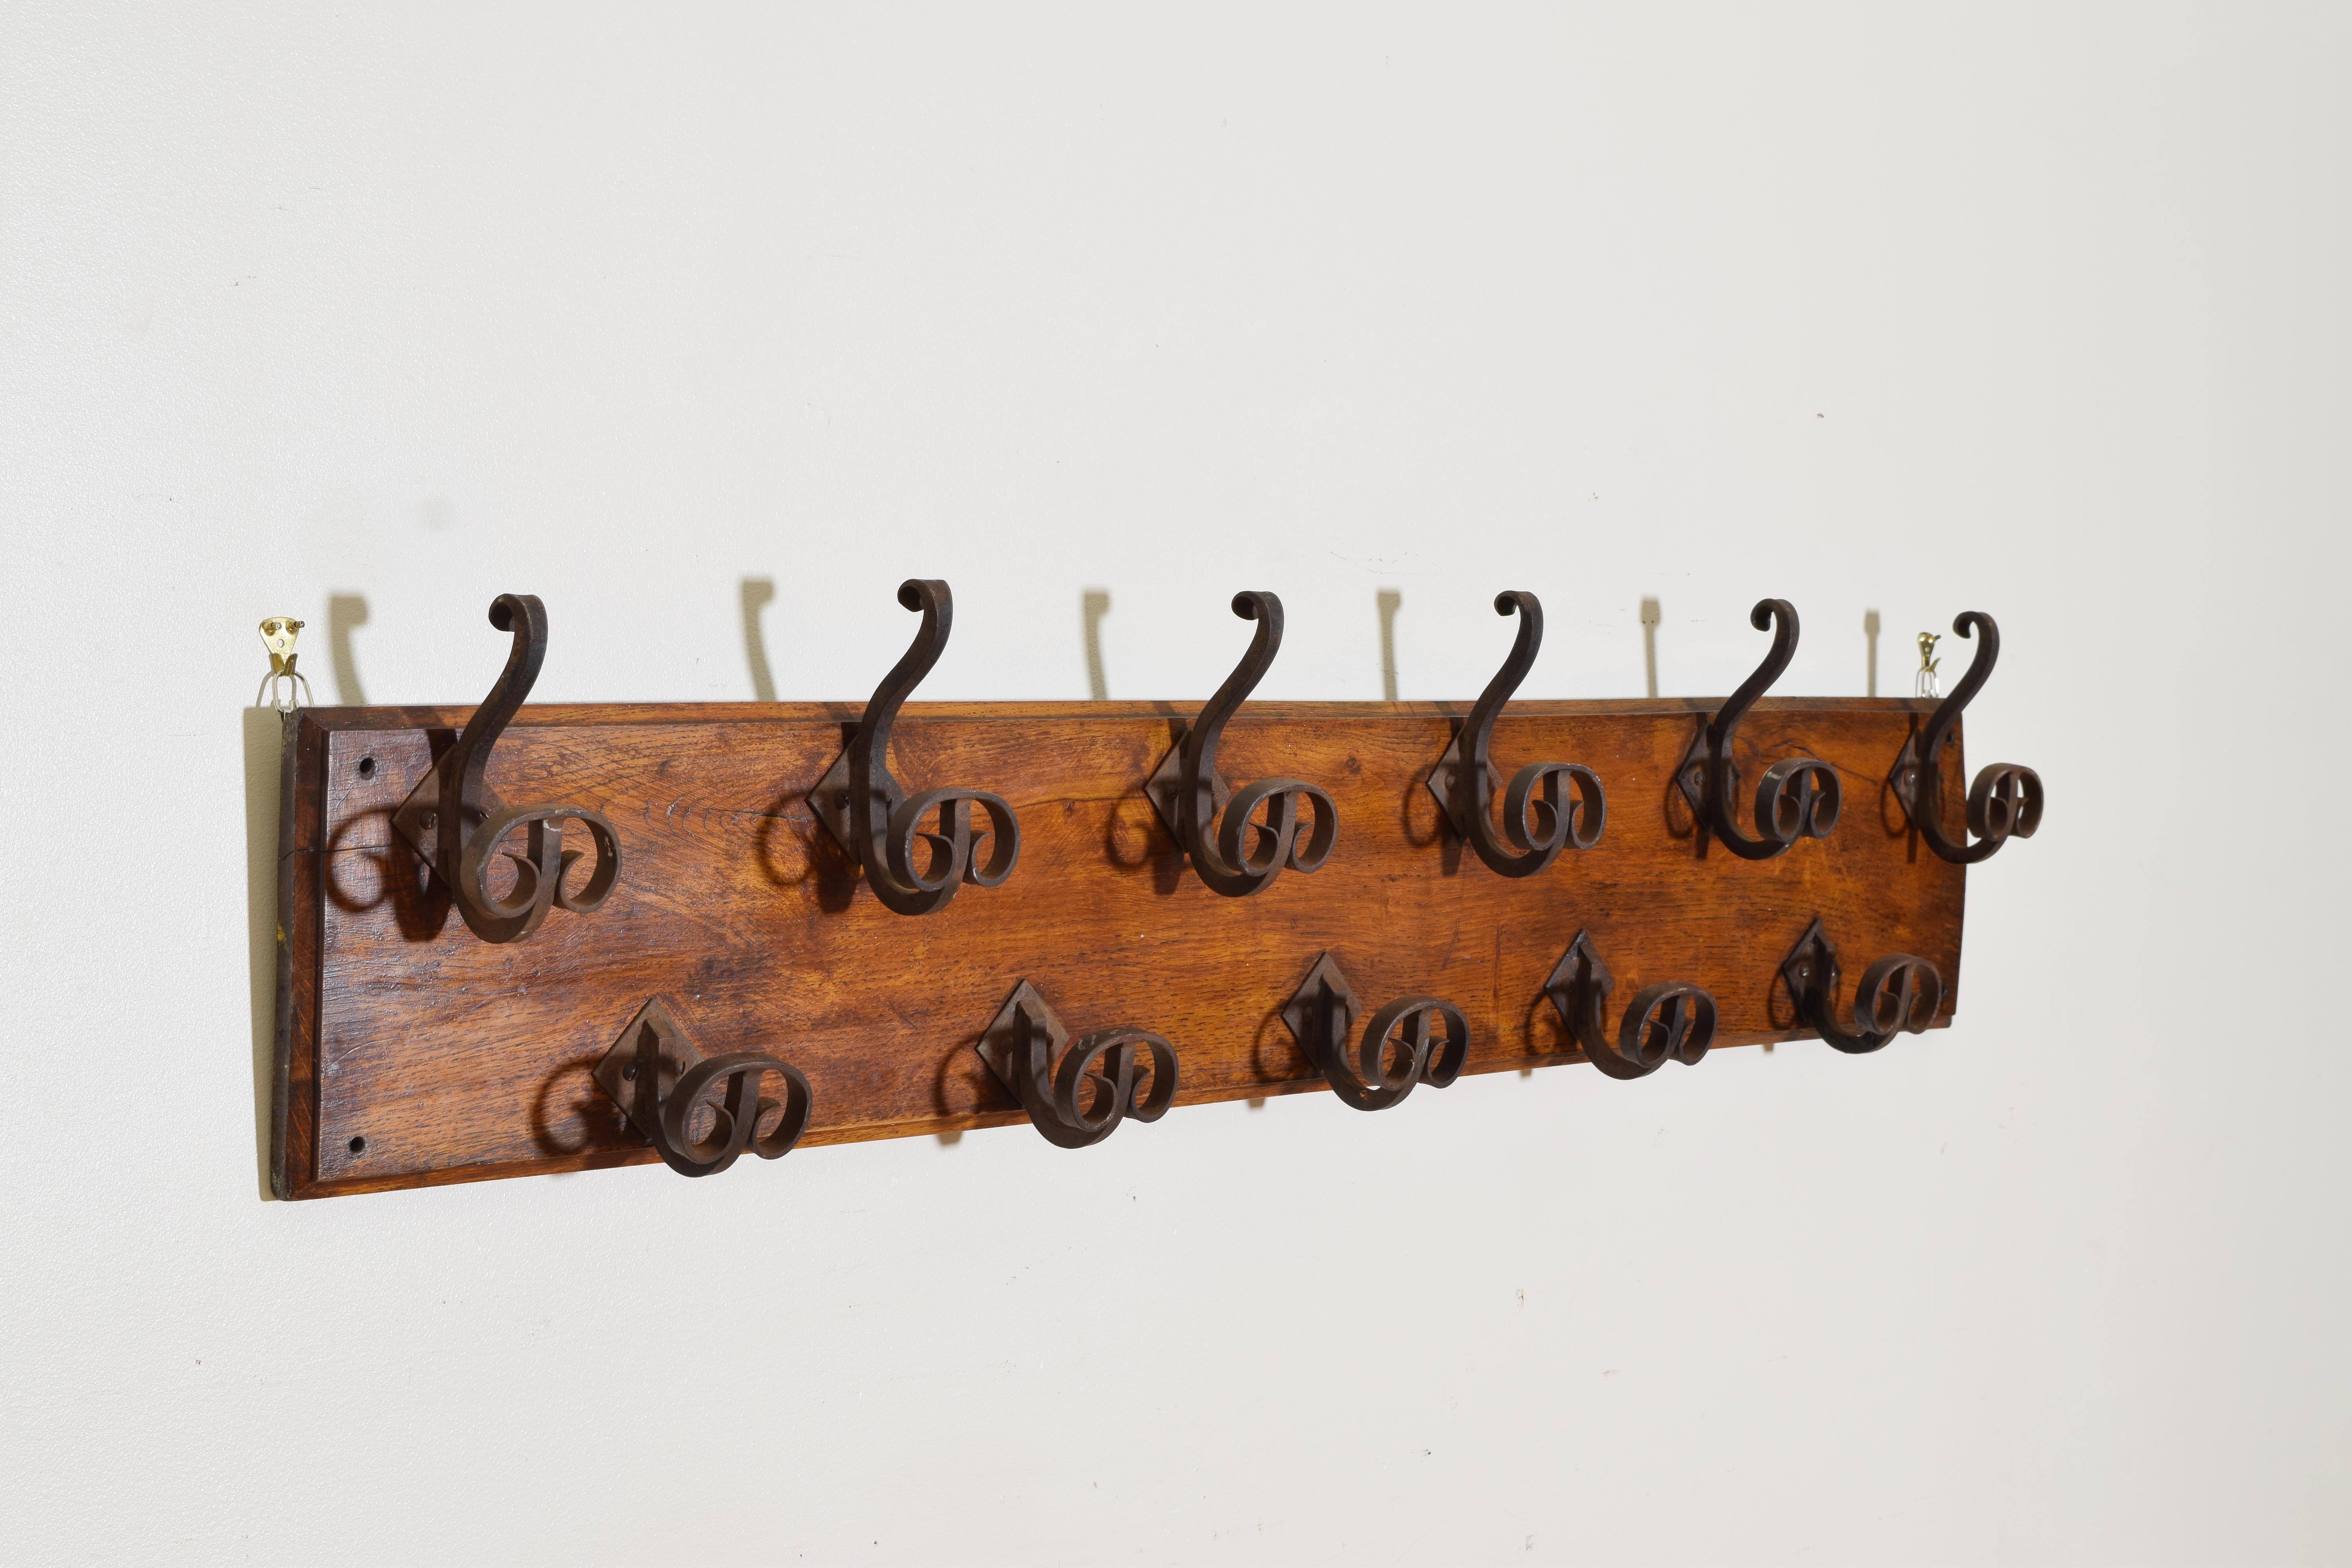 Having a rectangular backplate with an upper row of six wrought iron hooks and a lower row of five wrought iron hooks